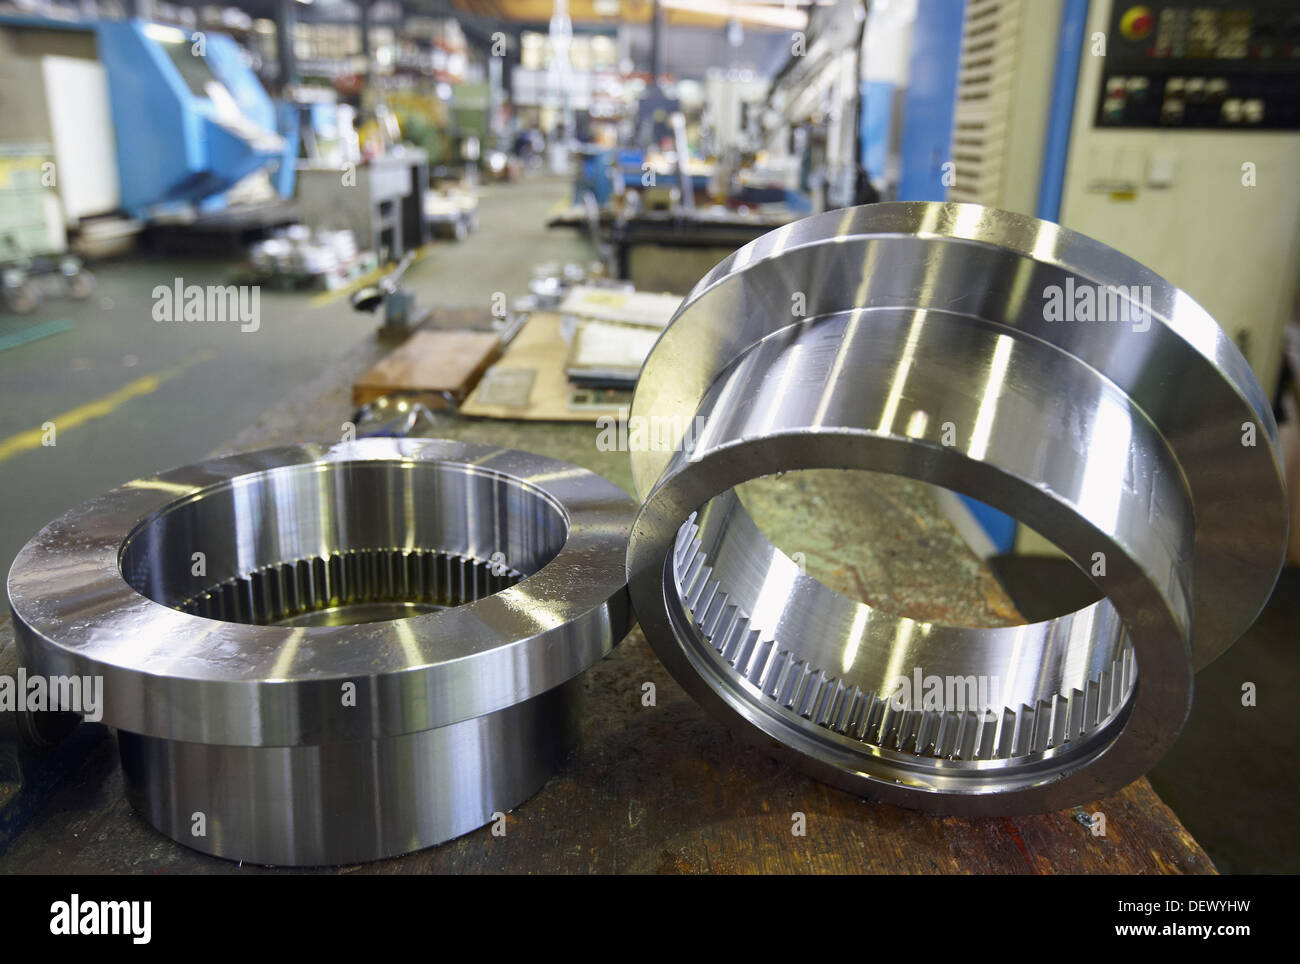 Transmission manufacturing, metallurgy, Guipuzcoa, Basque Country, Spain Stock Photo